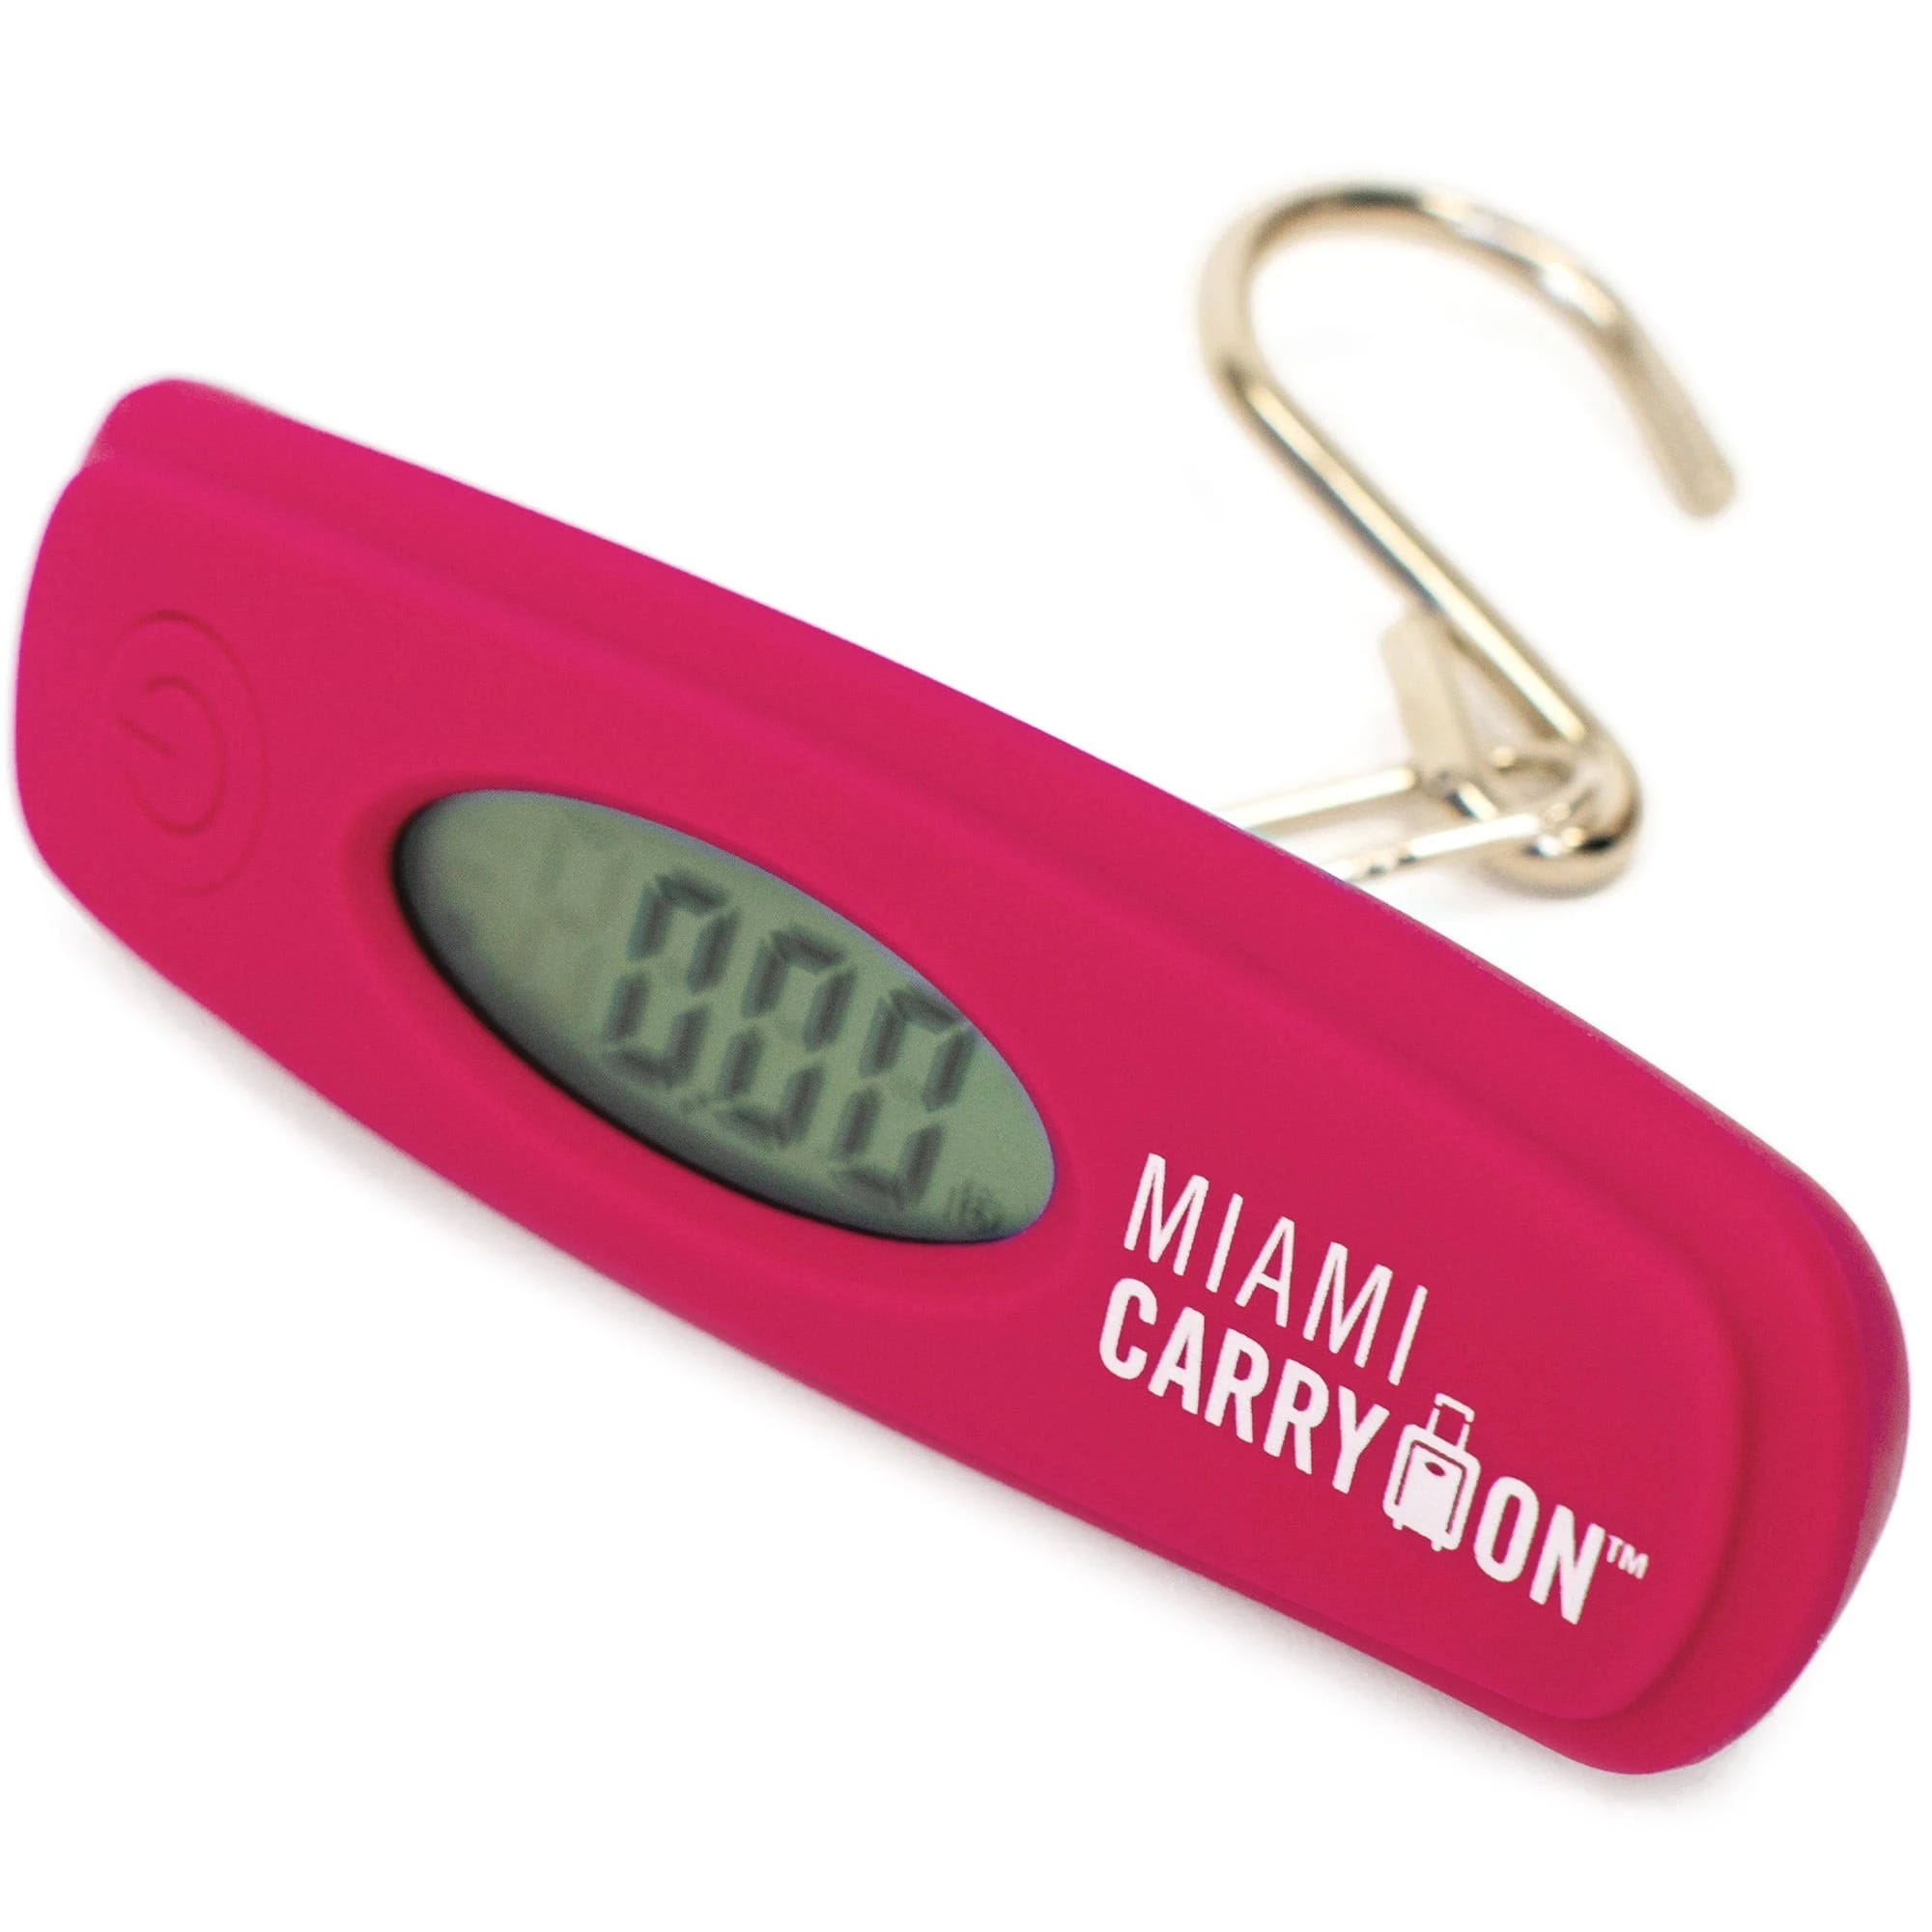 Miami Carryon Digital Hanging Luggage Scale: 50kg/110lbs Travel Scale in Hot Pink for Adults | Image